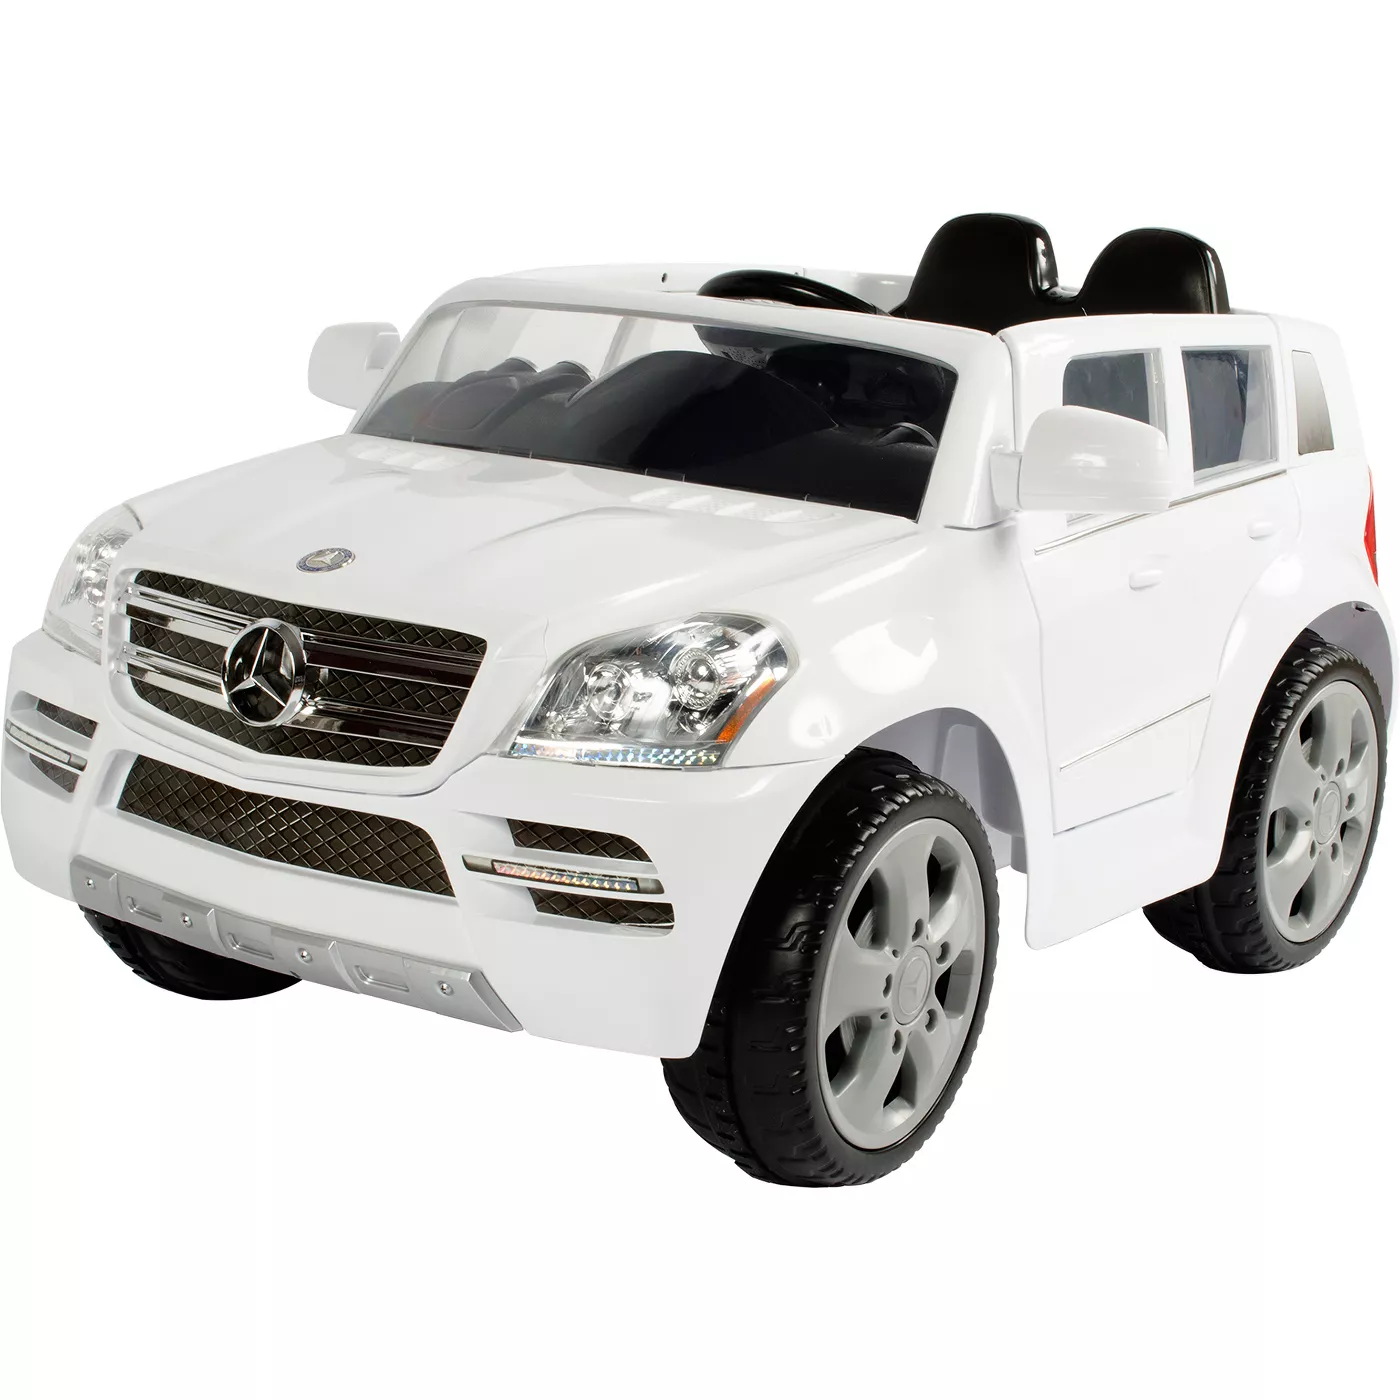 $70 Off the Rollplay Mercedes-Benz 6V GL450 SUV - Target